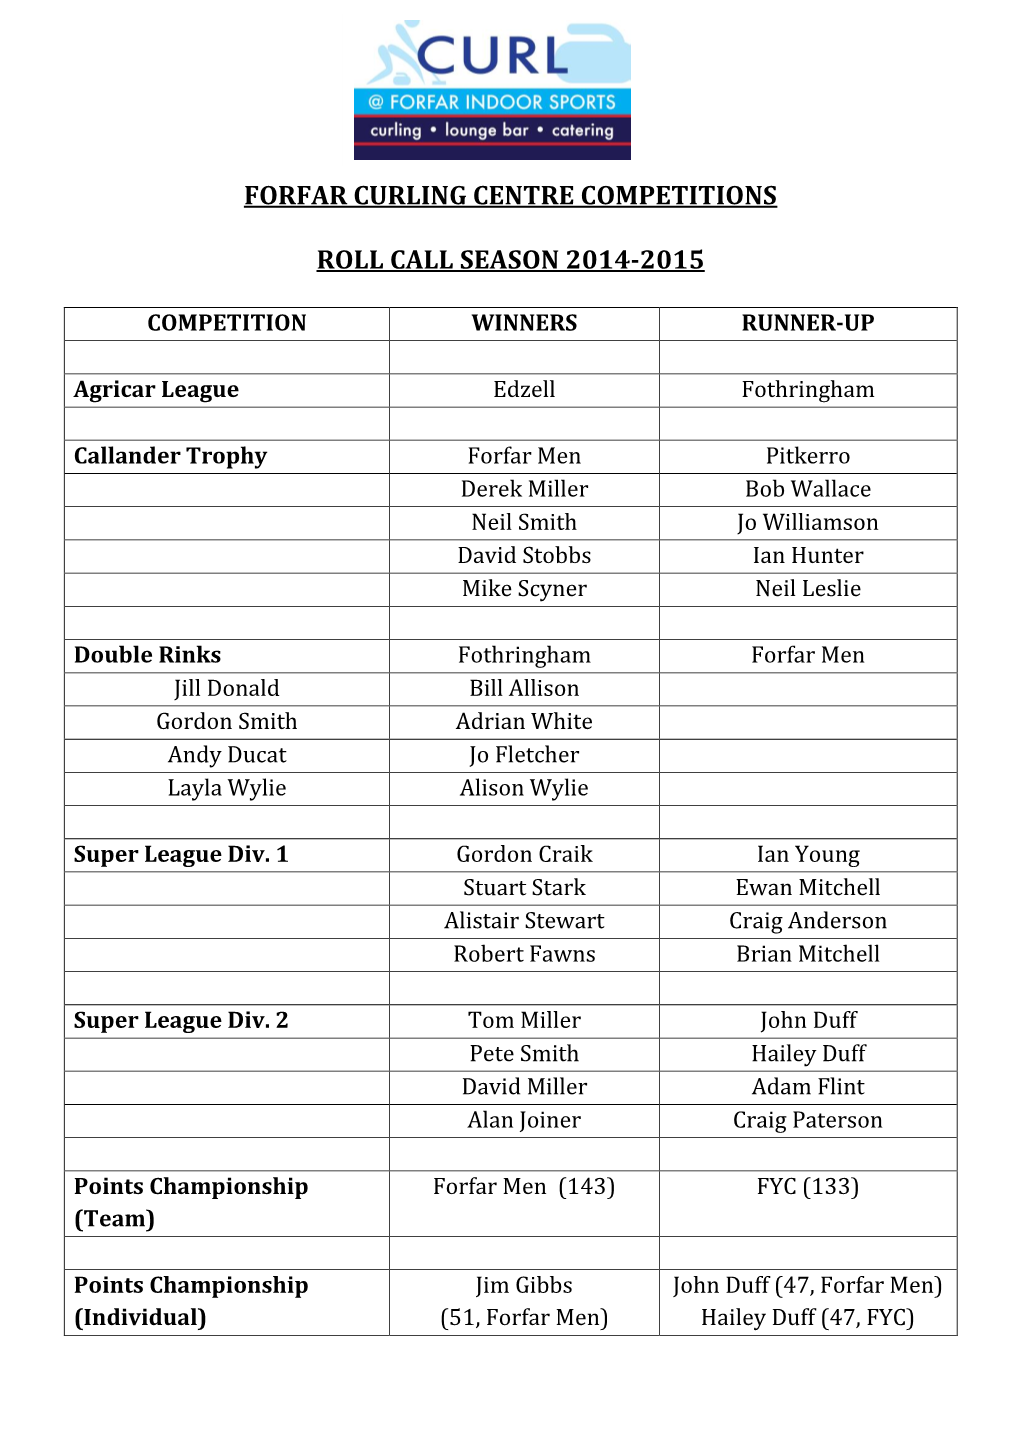 Forfar Curling Centre Competitions Roll Call Season 2014-2015